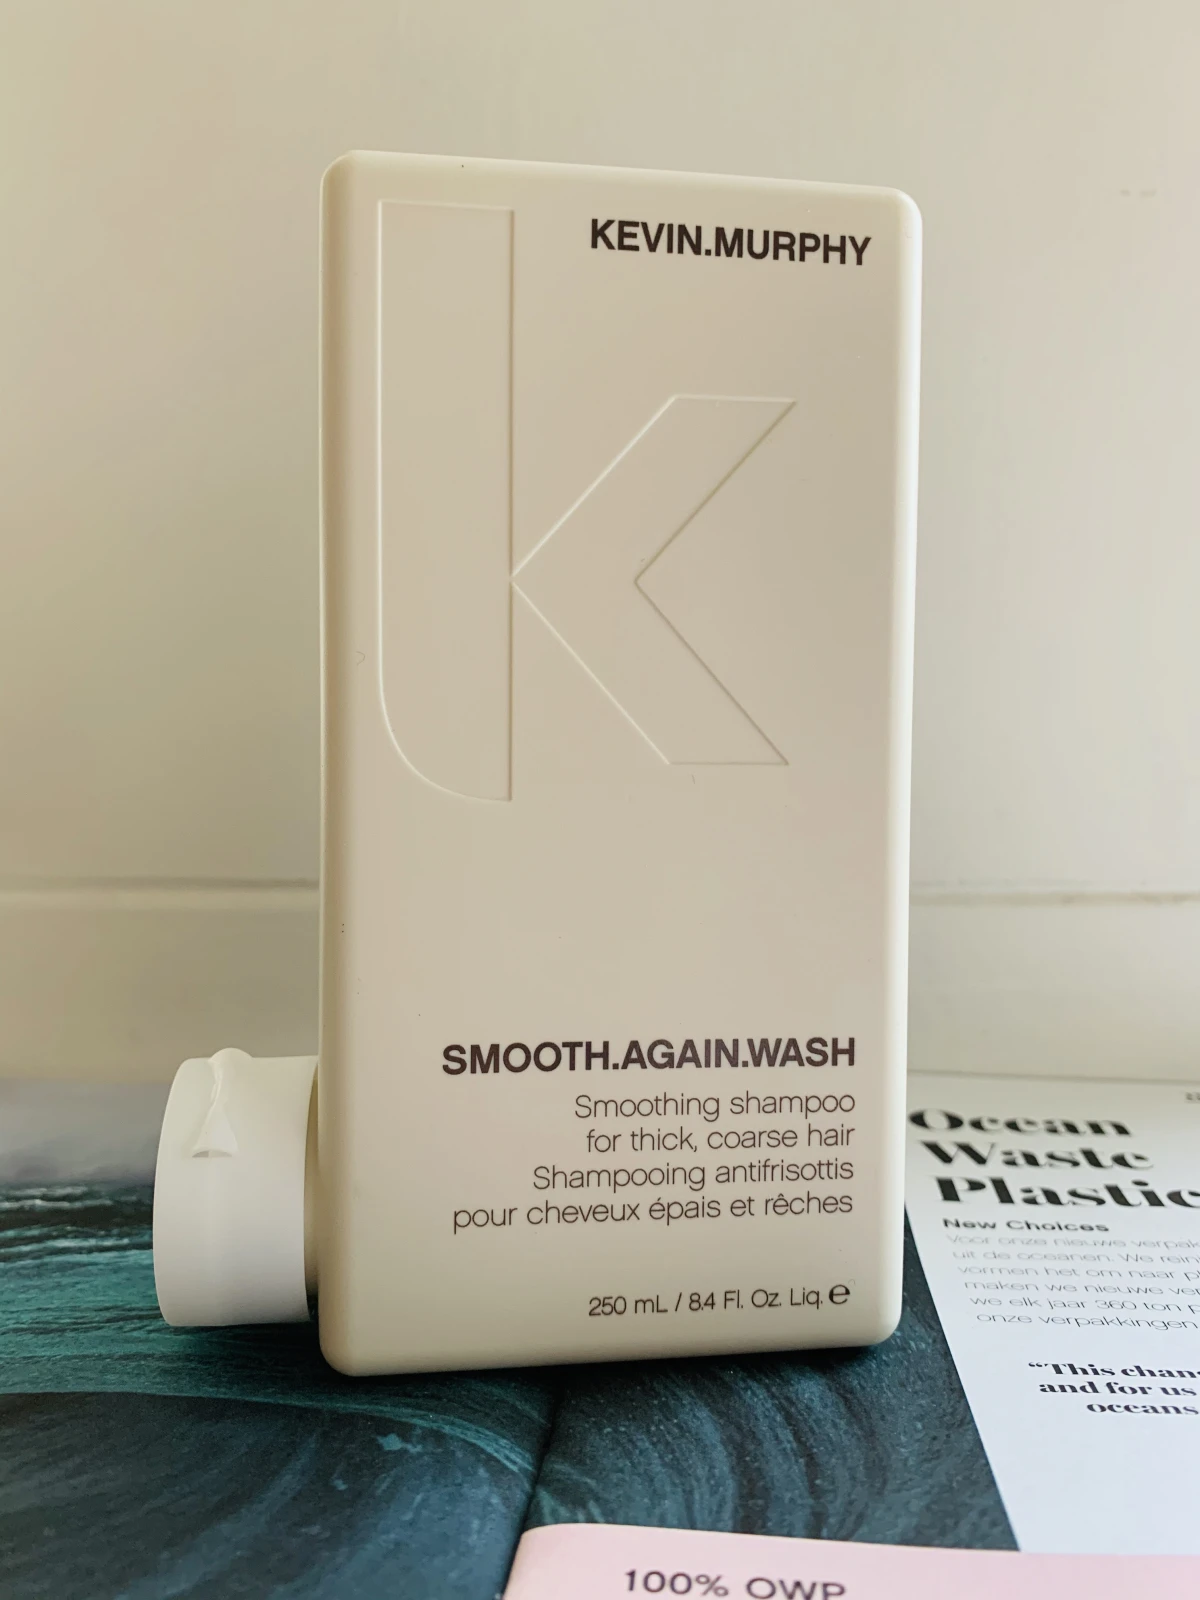 Kevin Murphy - SMOOTH.AGAIN.WASH - review image